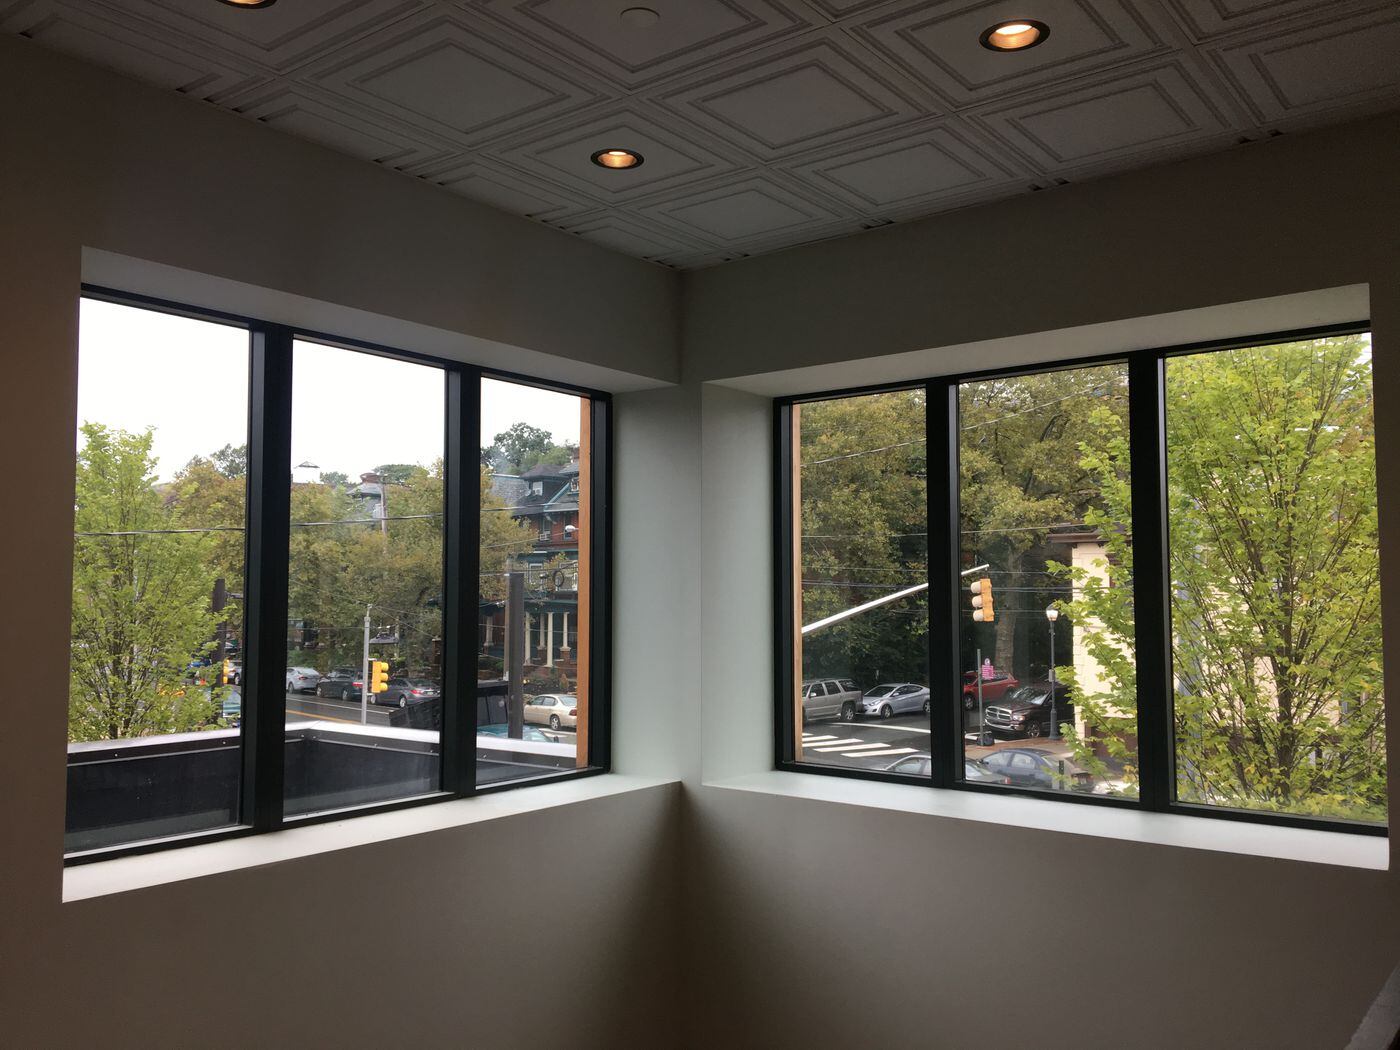 The second floor of the Trolley Car Station diner offers good views of Spruce Hill’s Victorian homes.